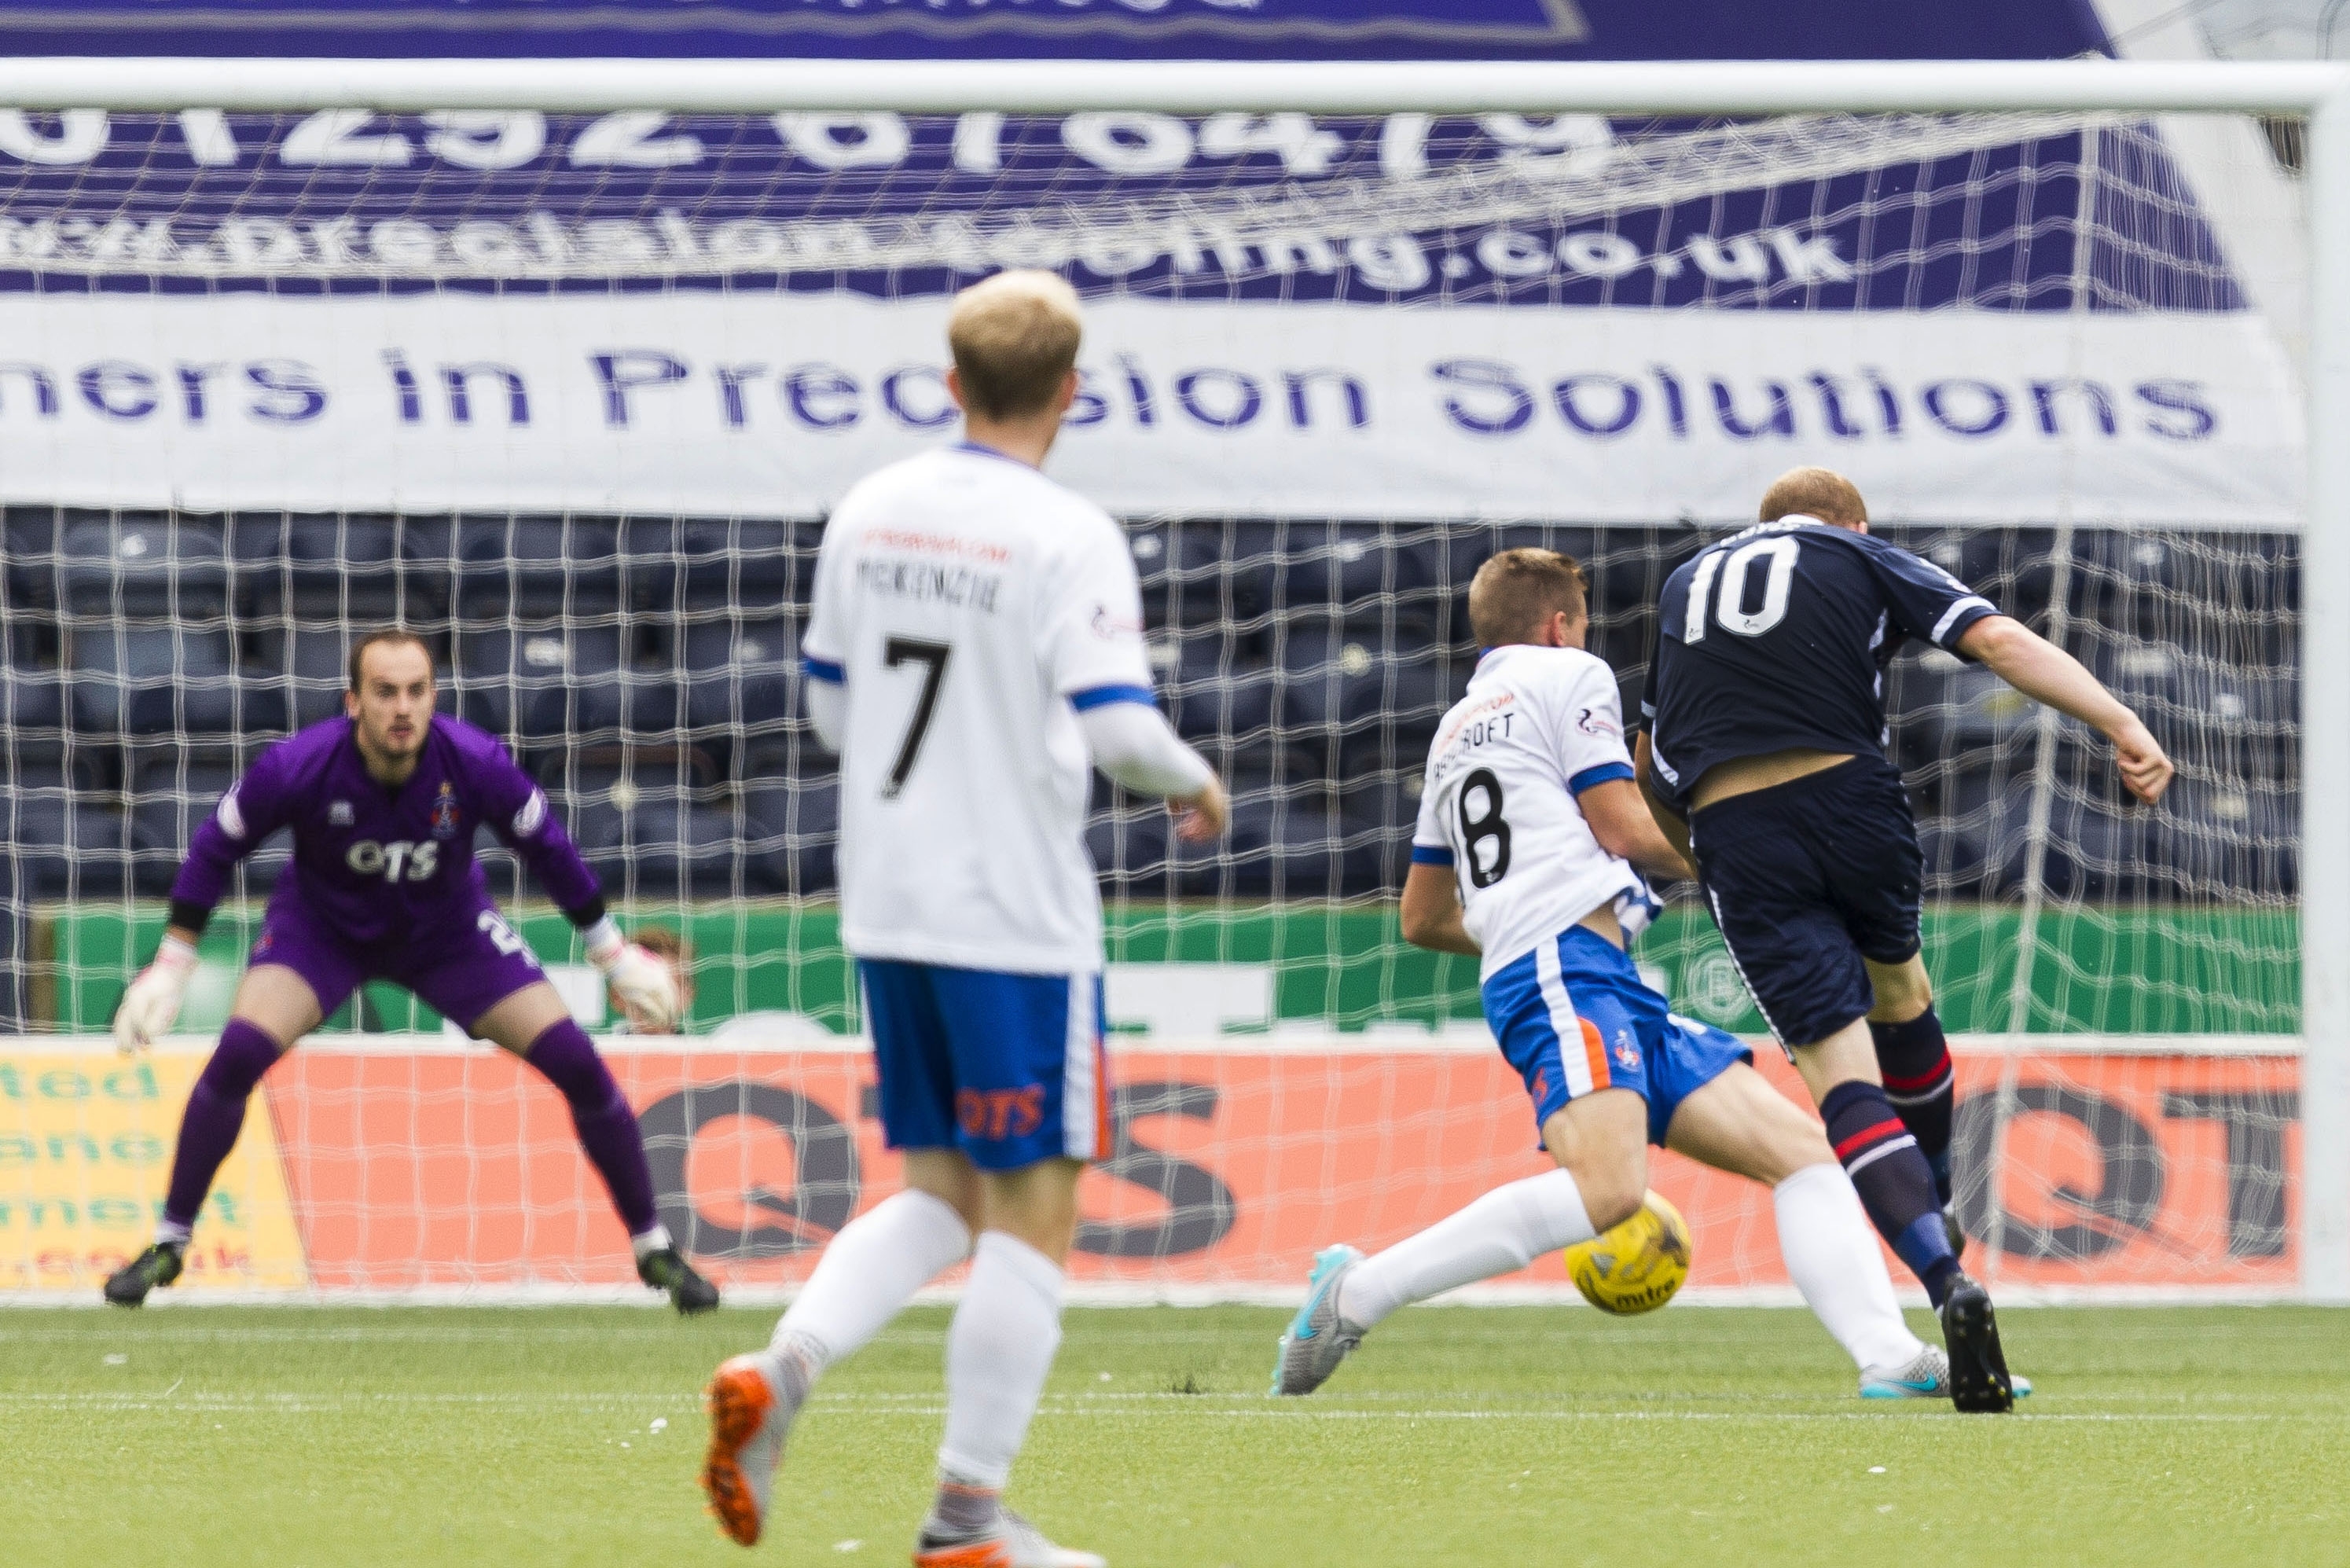 Ross County's Liam Boyce (right) fires home the first goal for his side